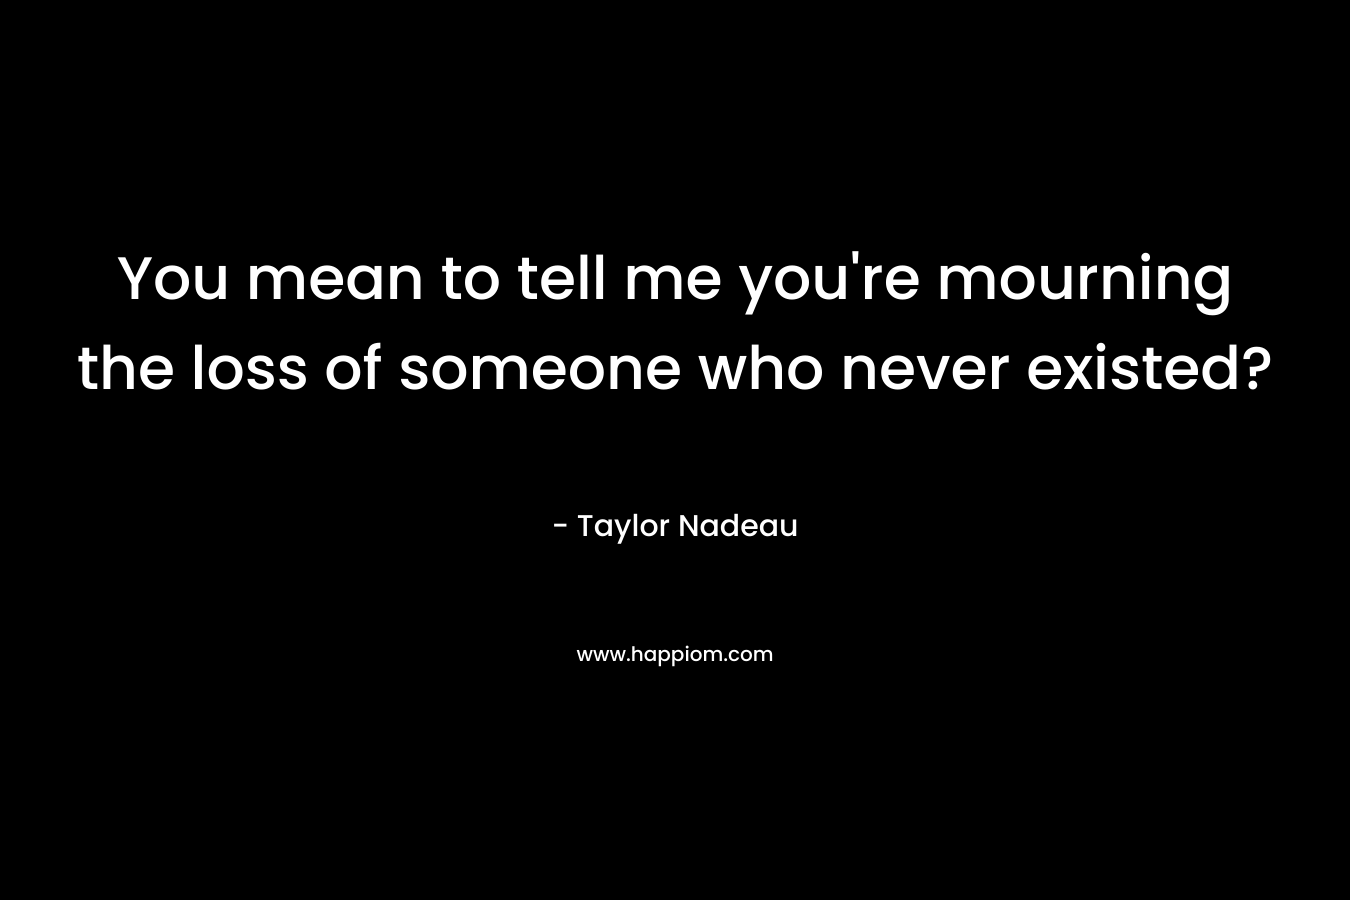 You mean to tell me you’re mourning the loss of someone who never existed? – Taylor Nadeau